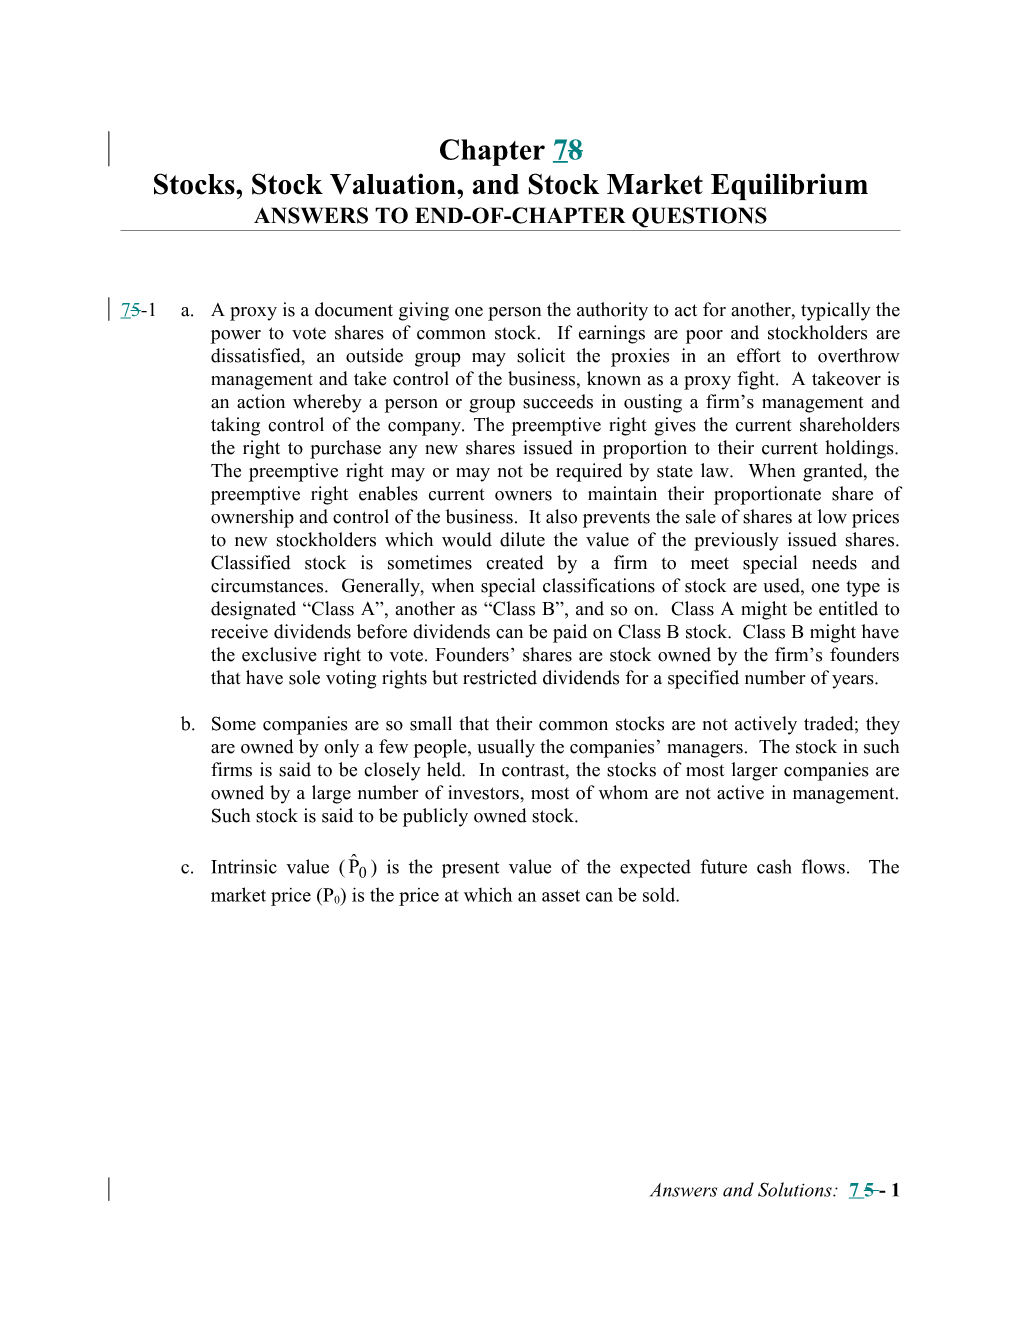 Stocks, Stock Valuation, and Stock Market Equilibrium